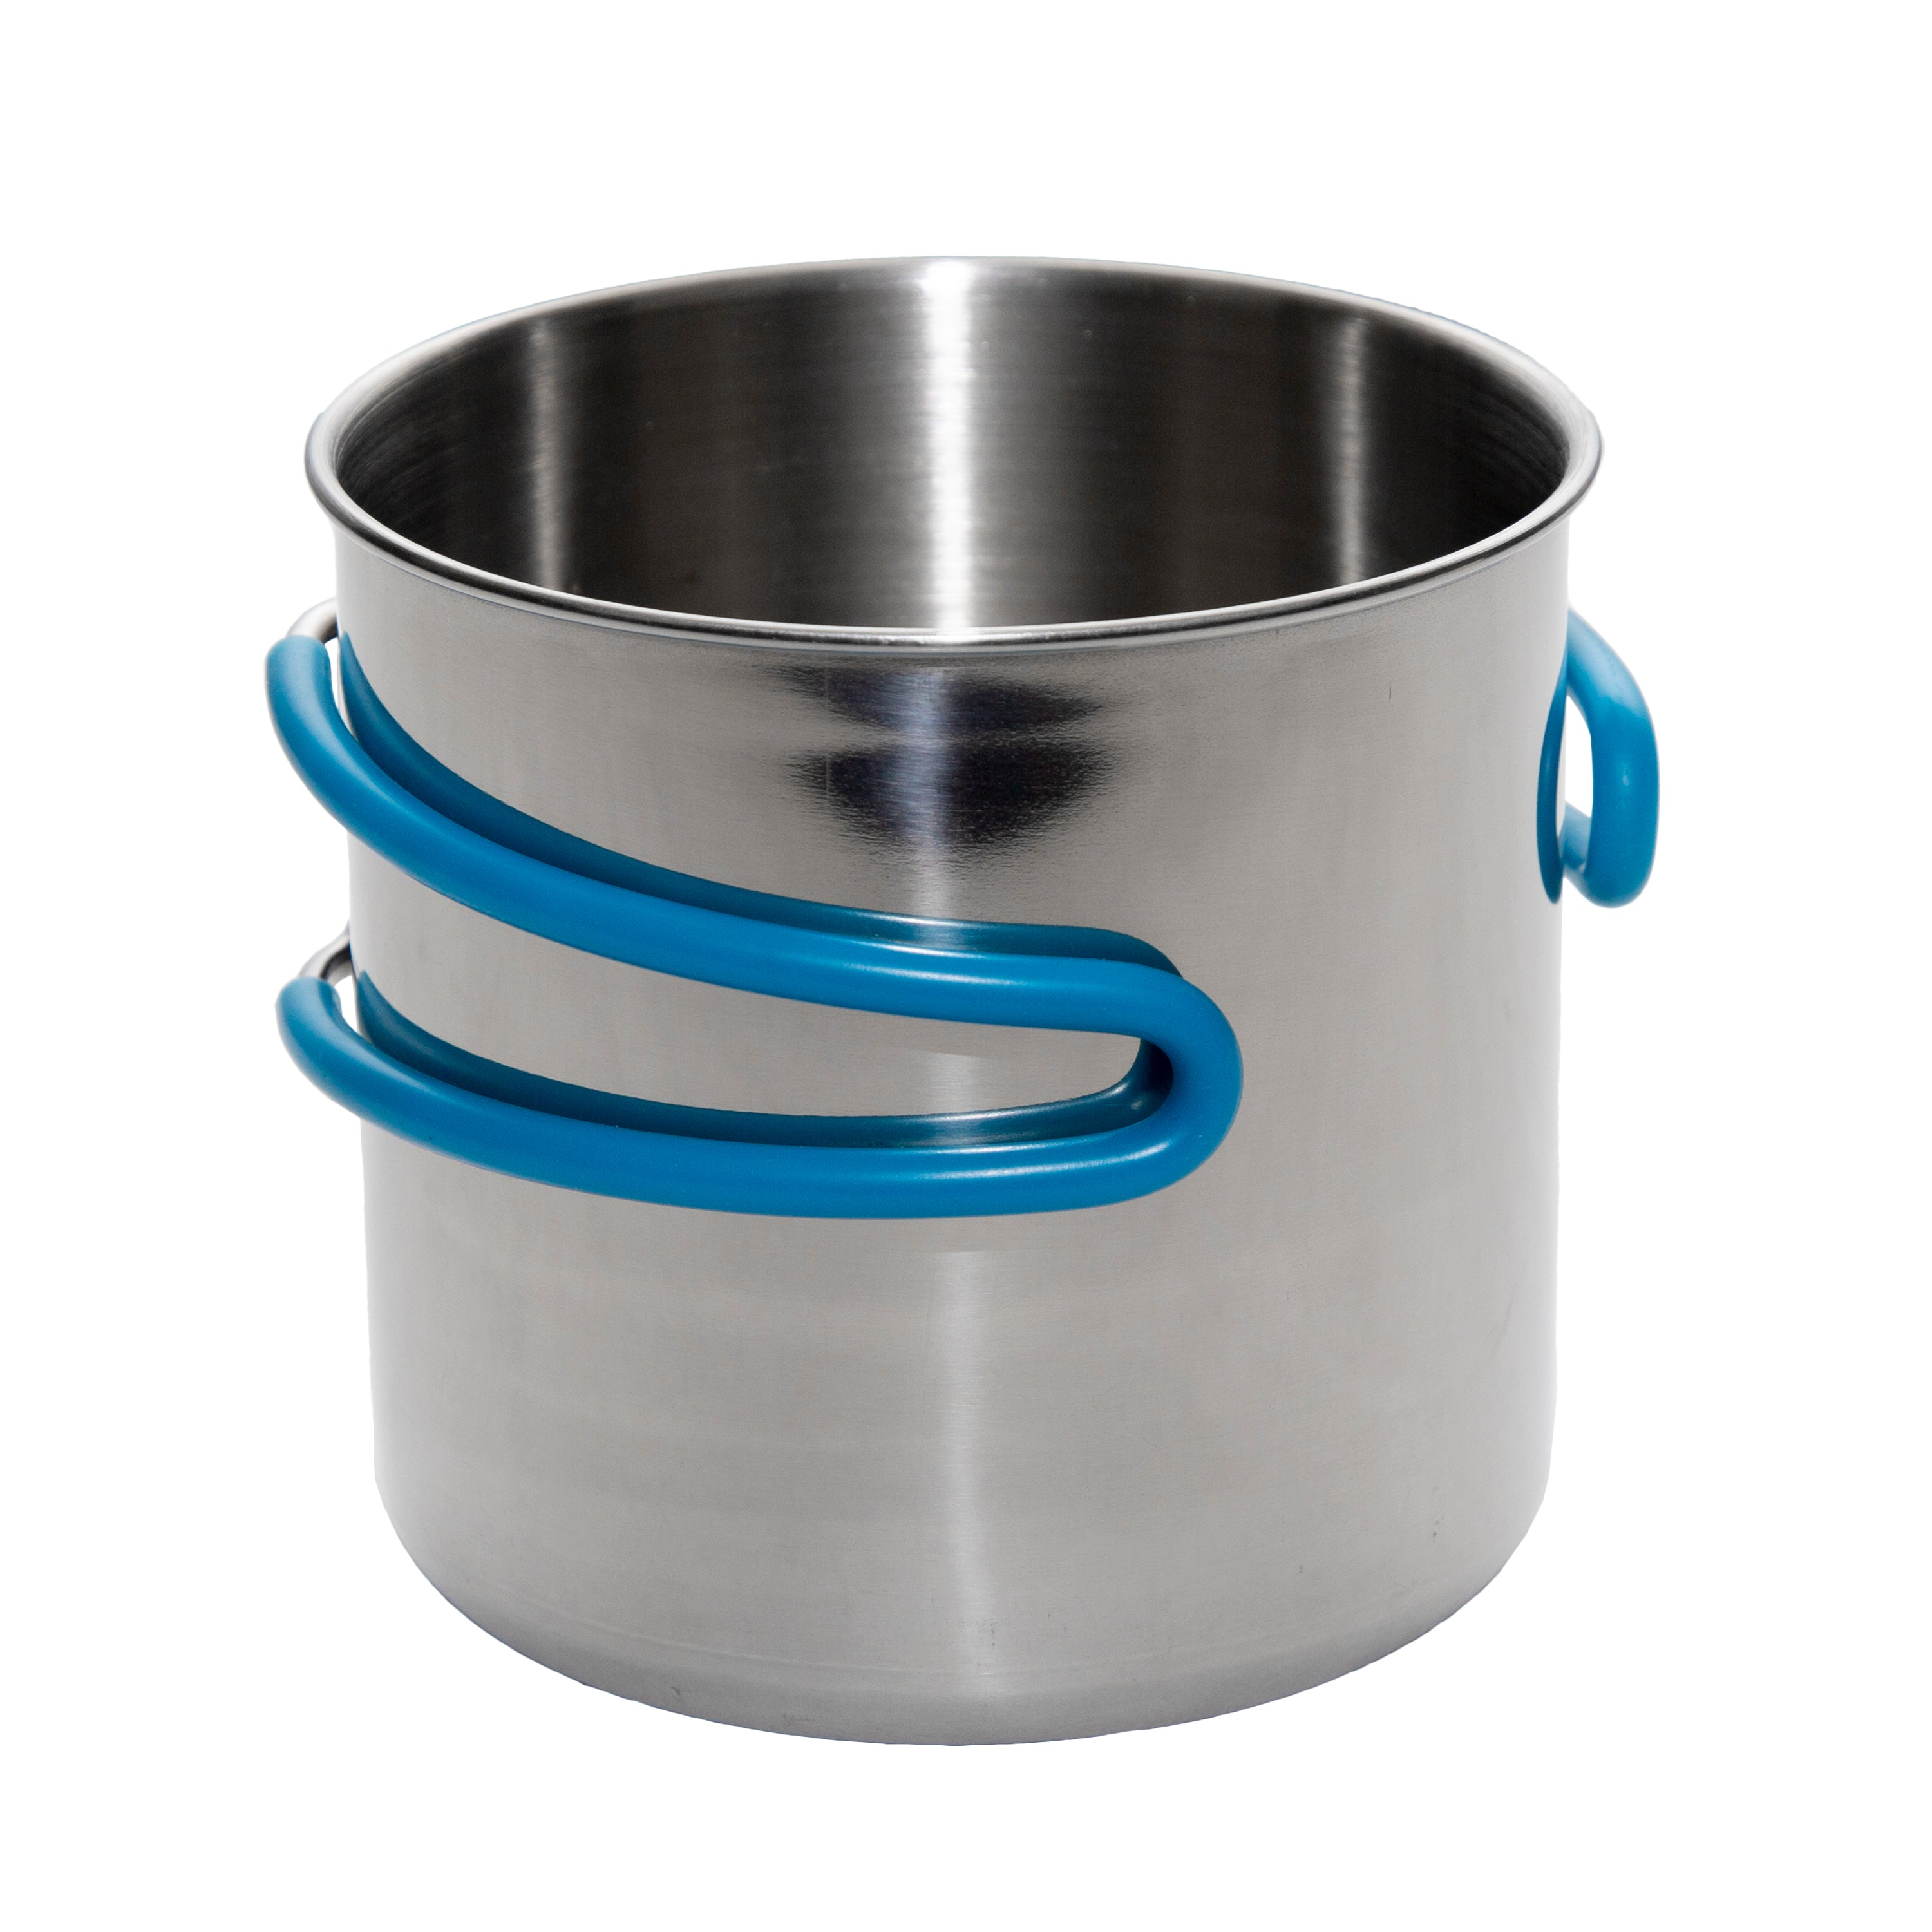 Stainless Steel Mug - 20 Oz With Blue Silicon Handle Cover